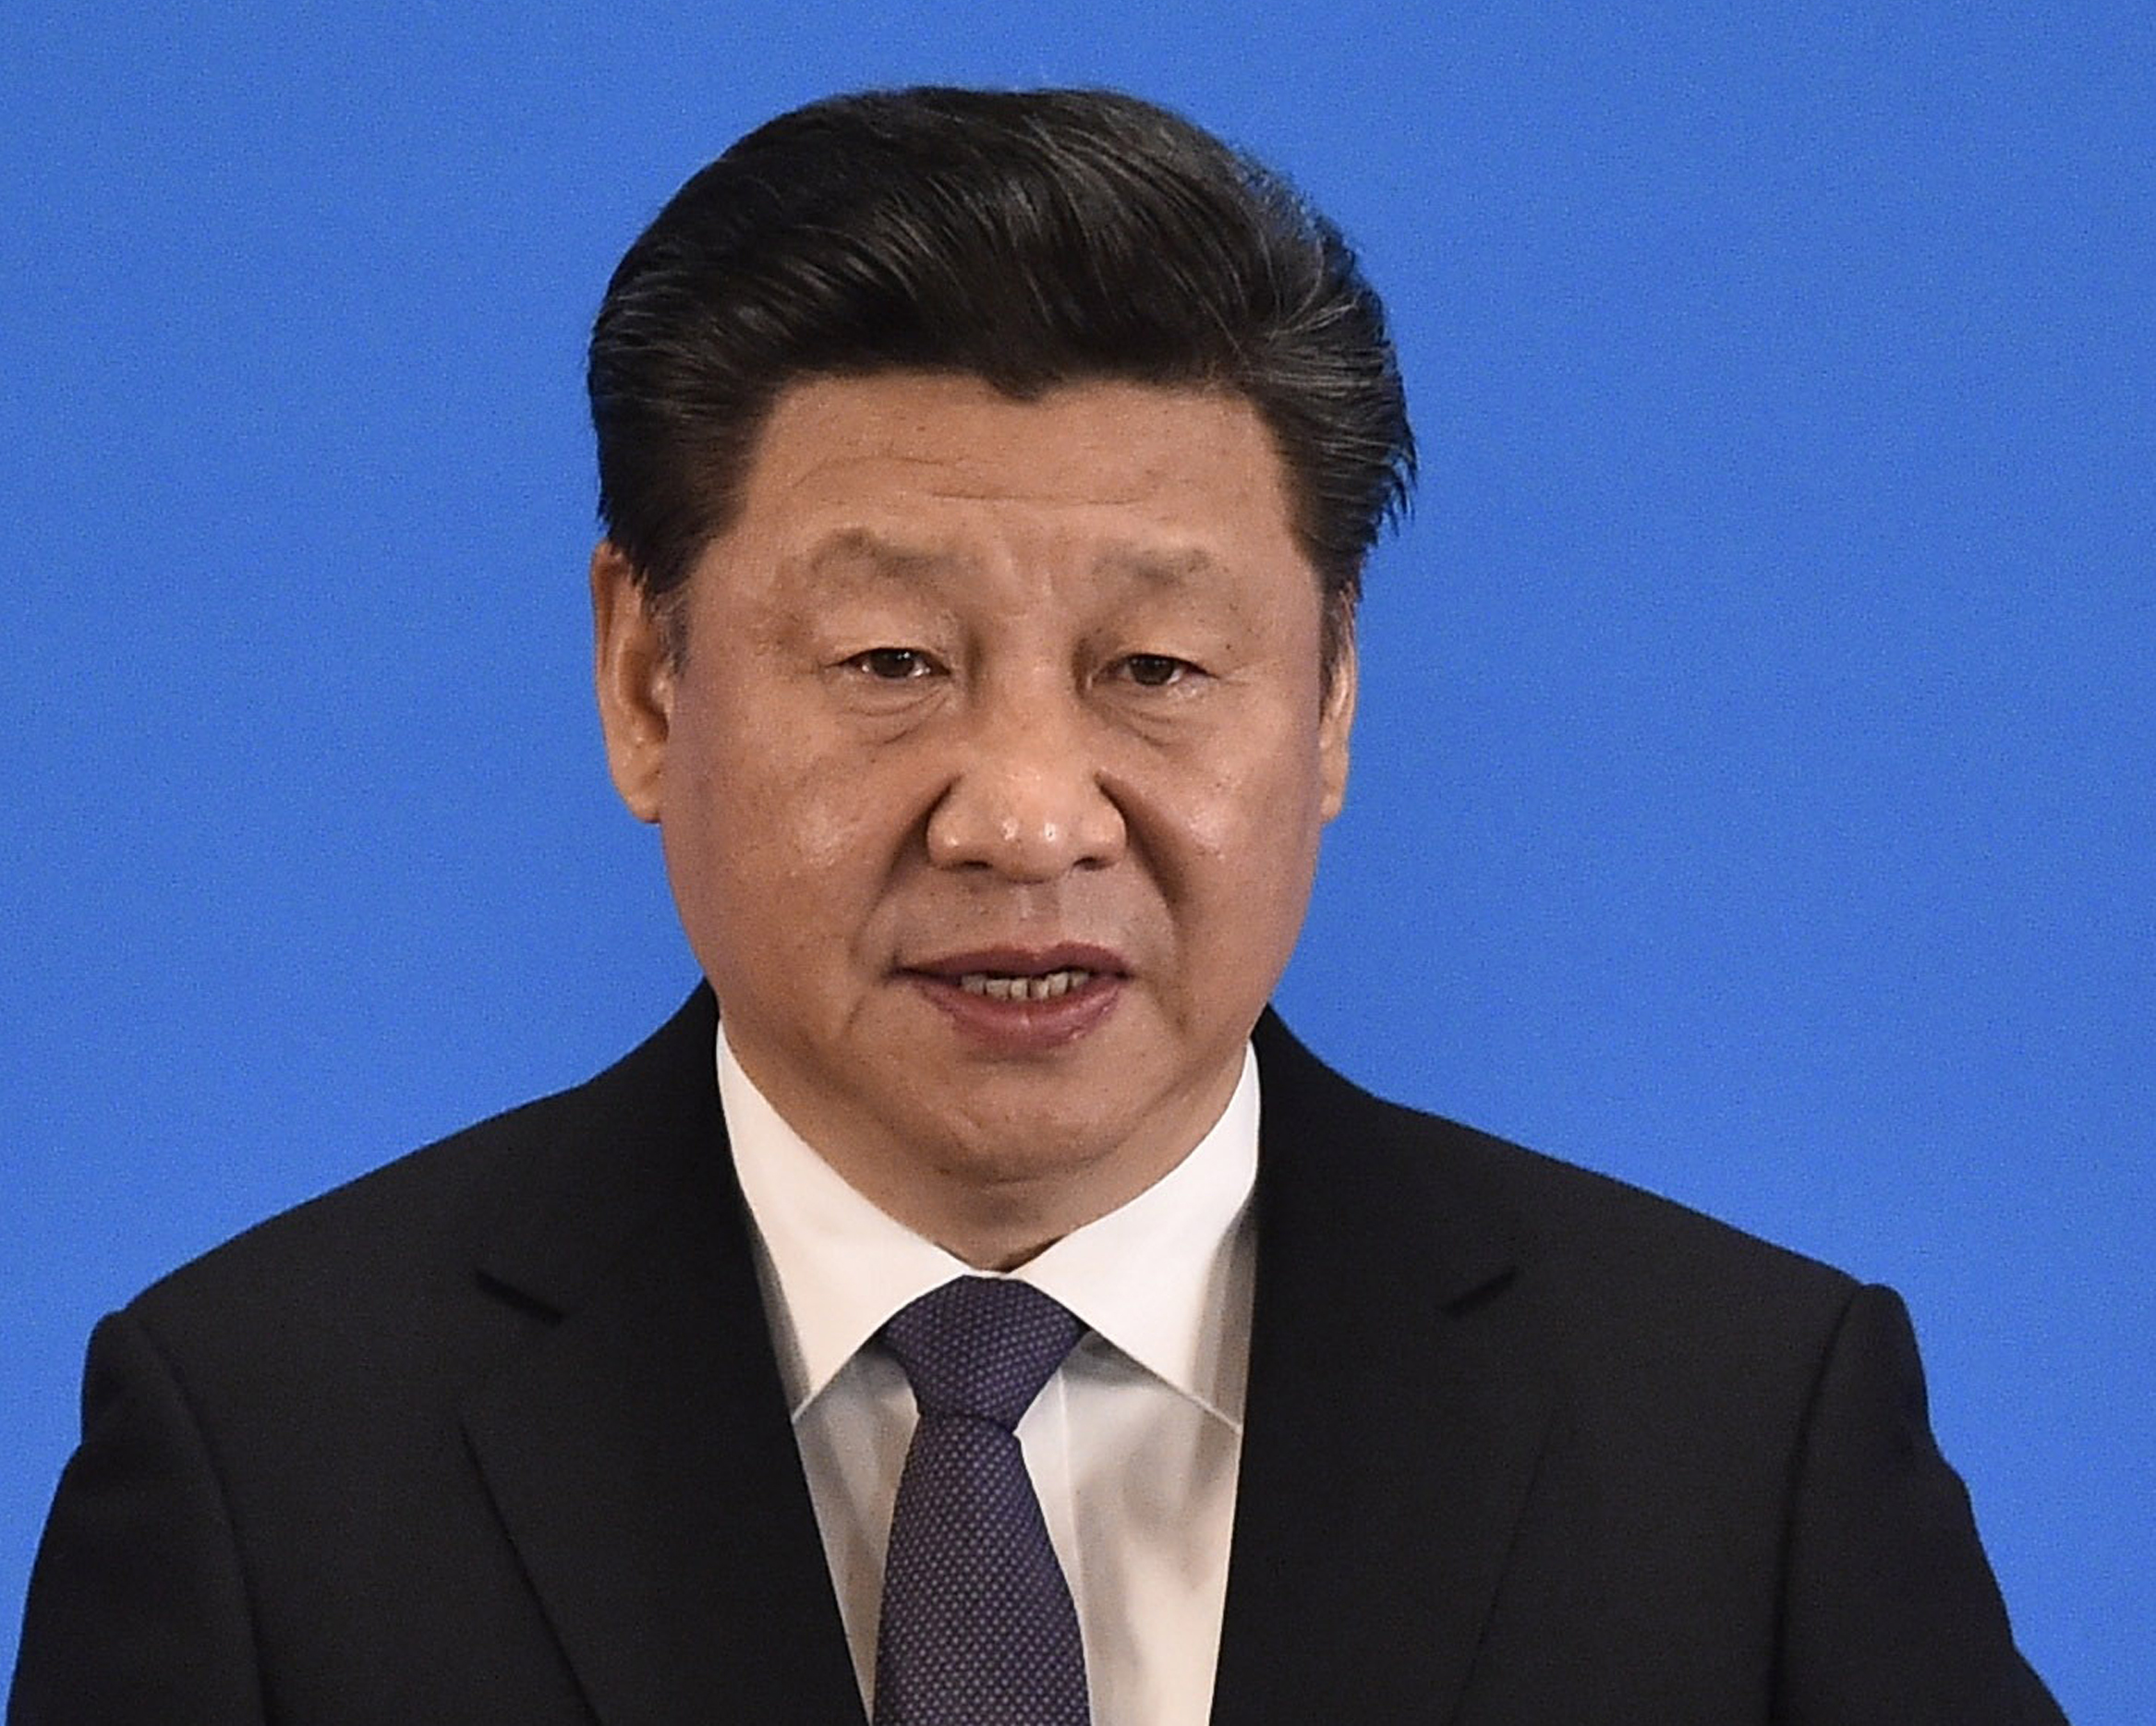 Chinese President Xi Jinping delivers a speech at the opening ceremony of the fifth regular foreign ministers' meeting of the Conference on Interaction and Confidence Building Measures in Asia in Beijing in April. China's Communist Party has elevated Xi to the position of 'core' of the leadership, the official Xinhua News Agency said late Thursday. | AP